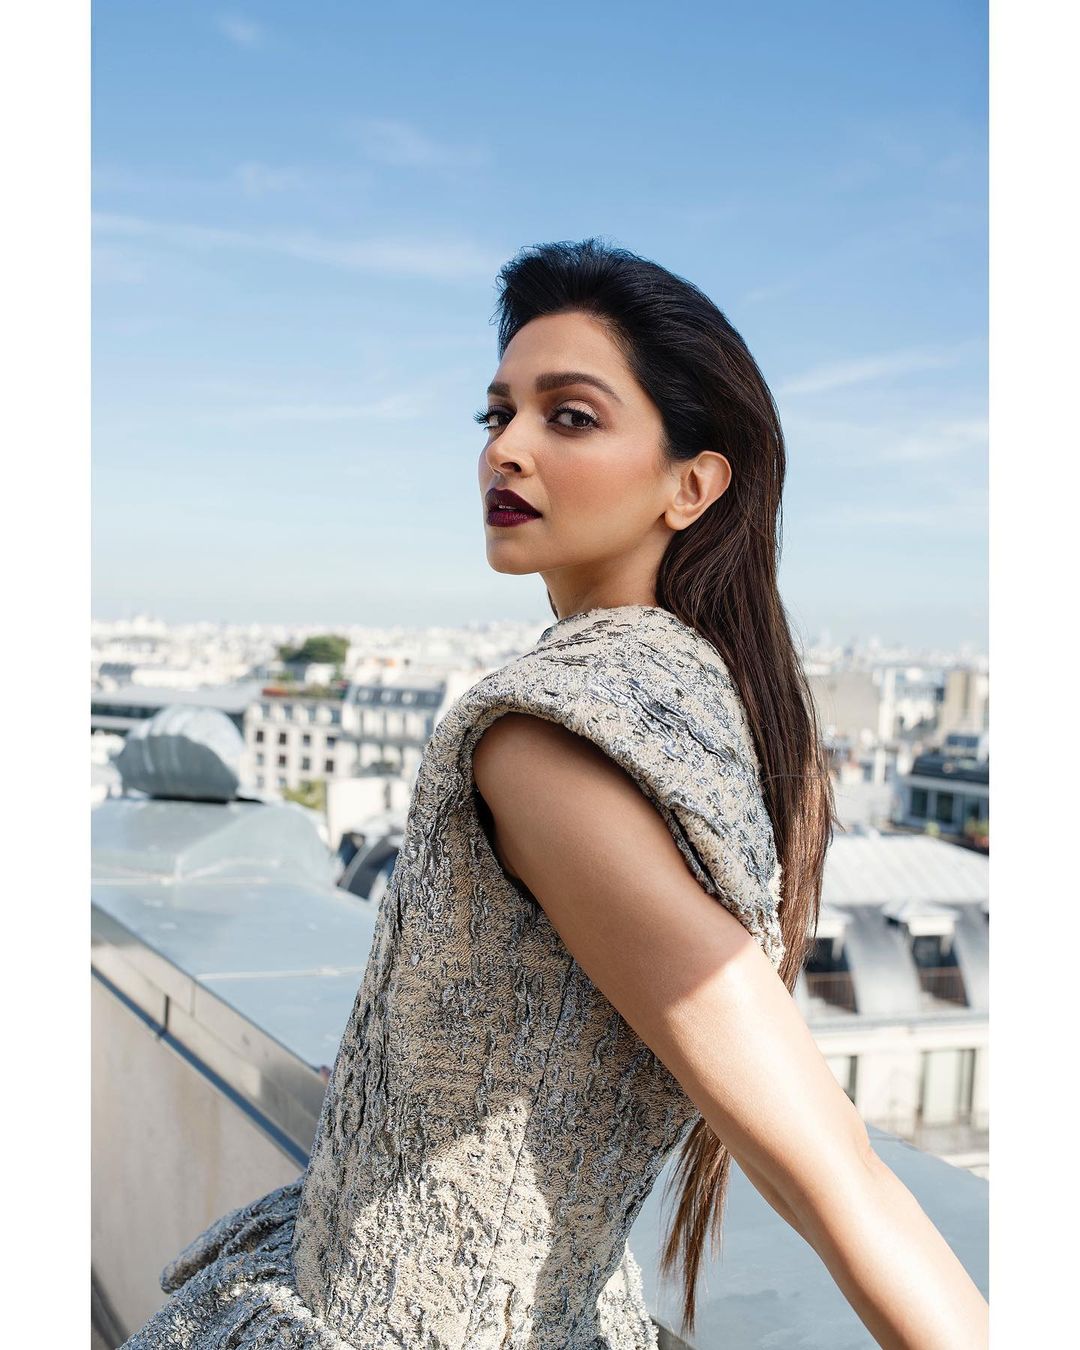 Deepika Padukone makes a bold fashion statement in lace and leather at  Paris Fashion week - Pics inside